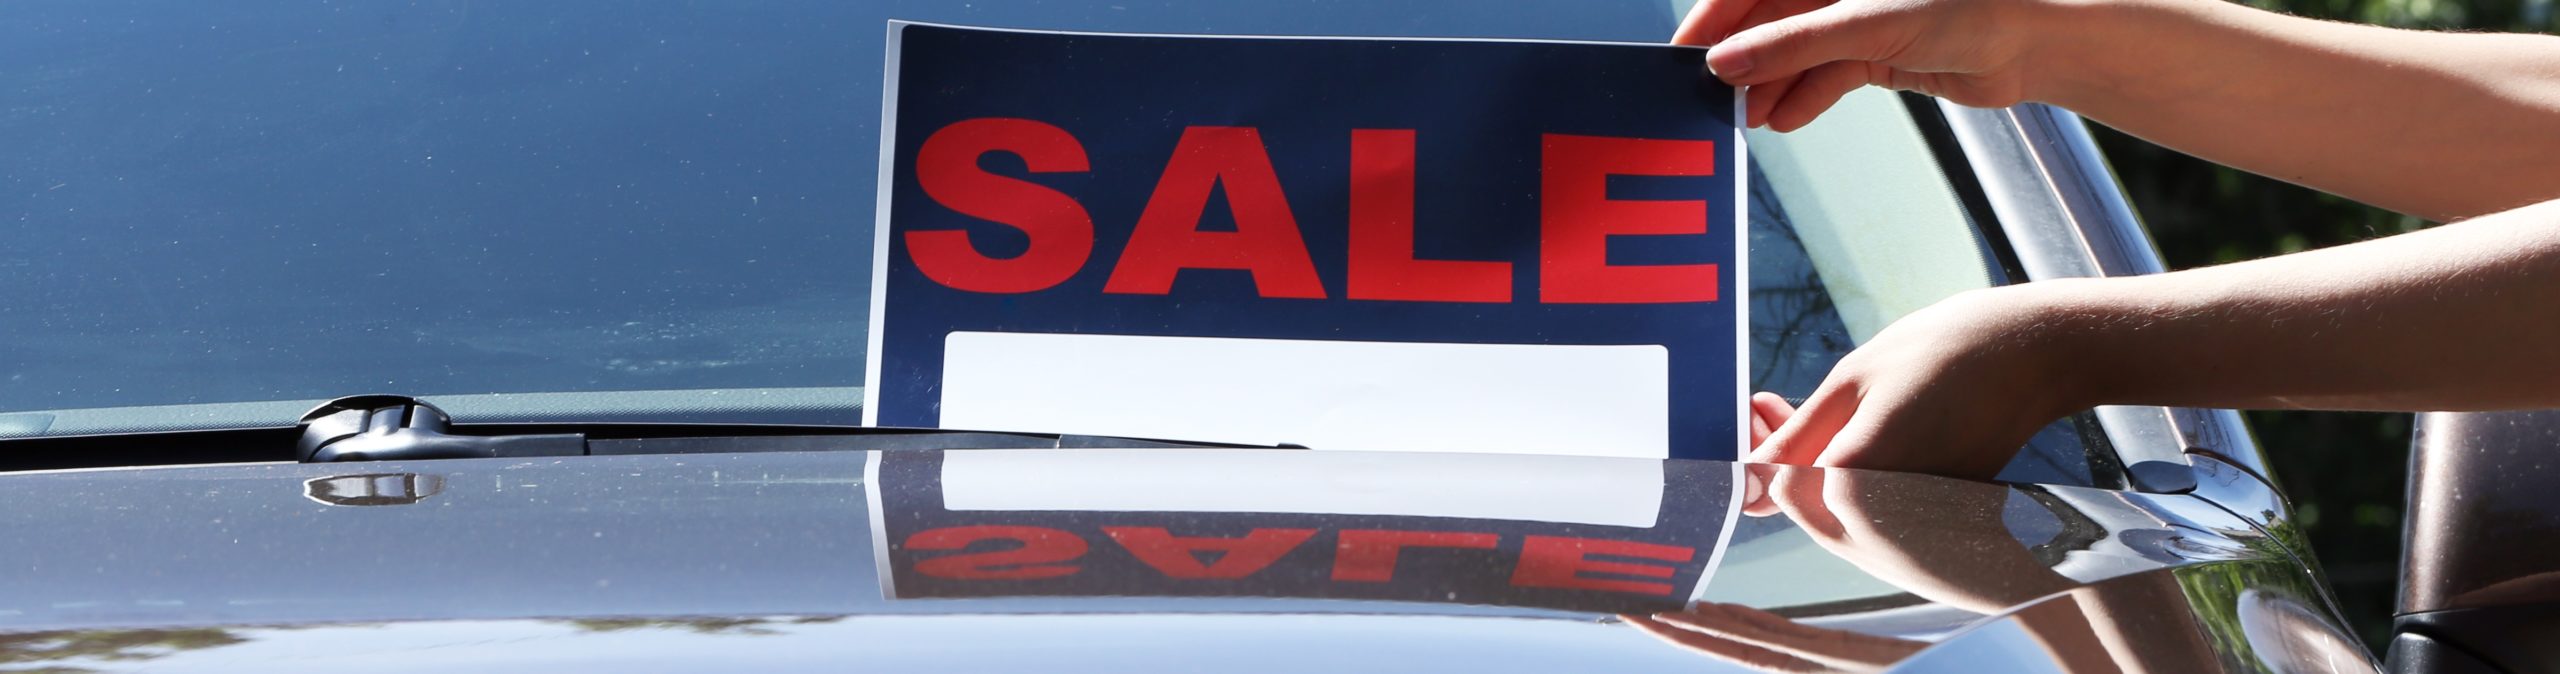 Inflated used car prices leaves small dealerships struggling to buy stock